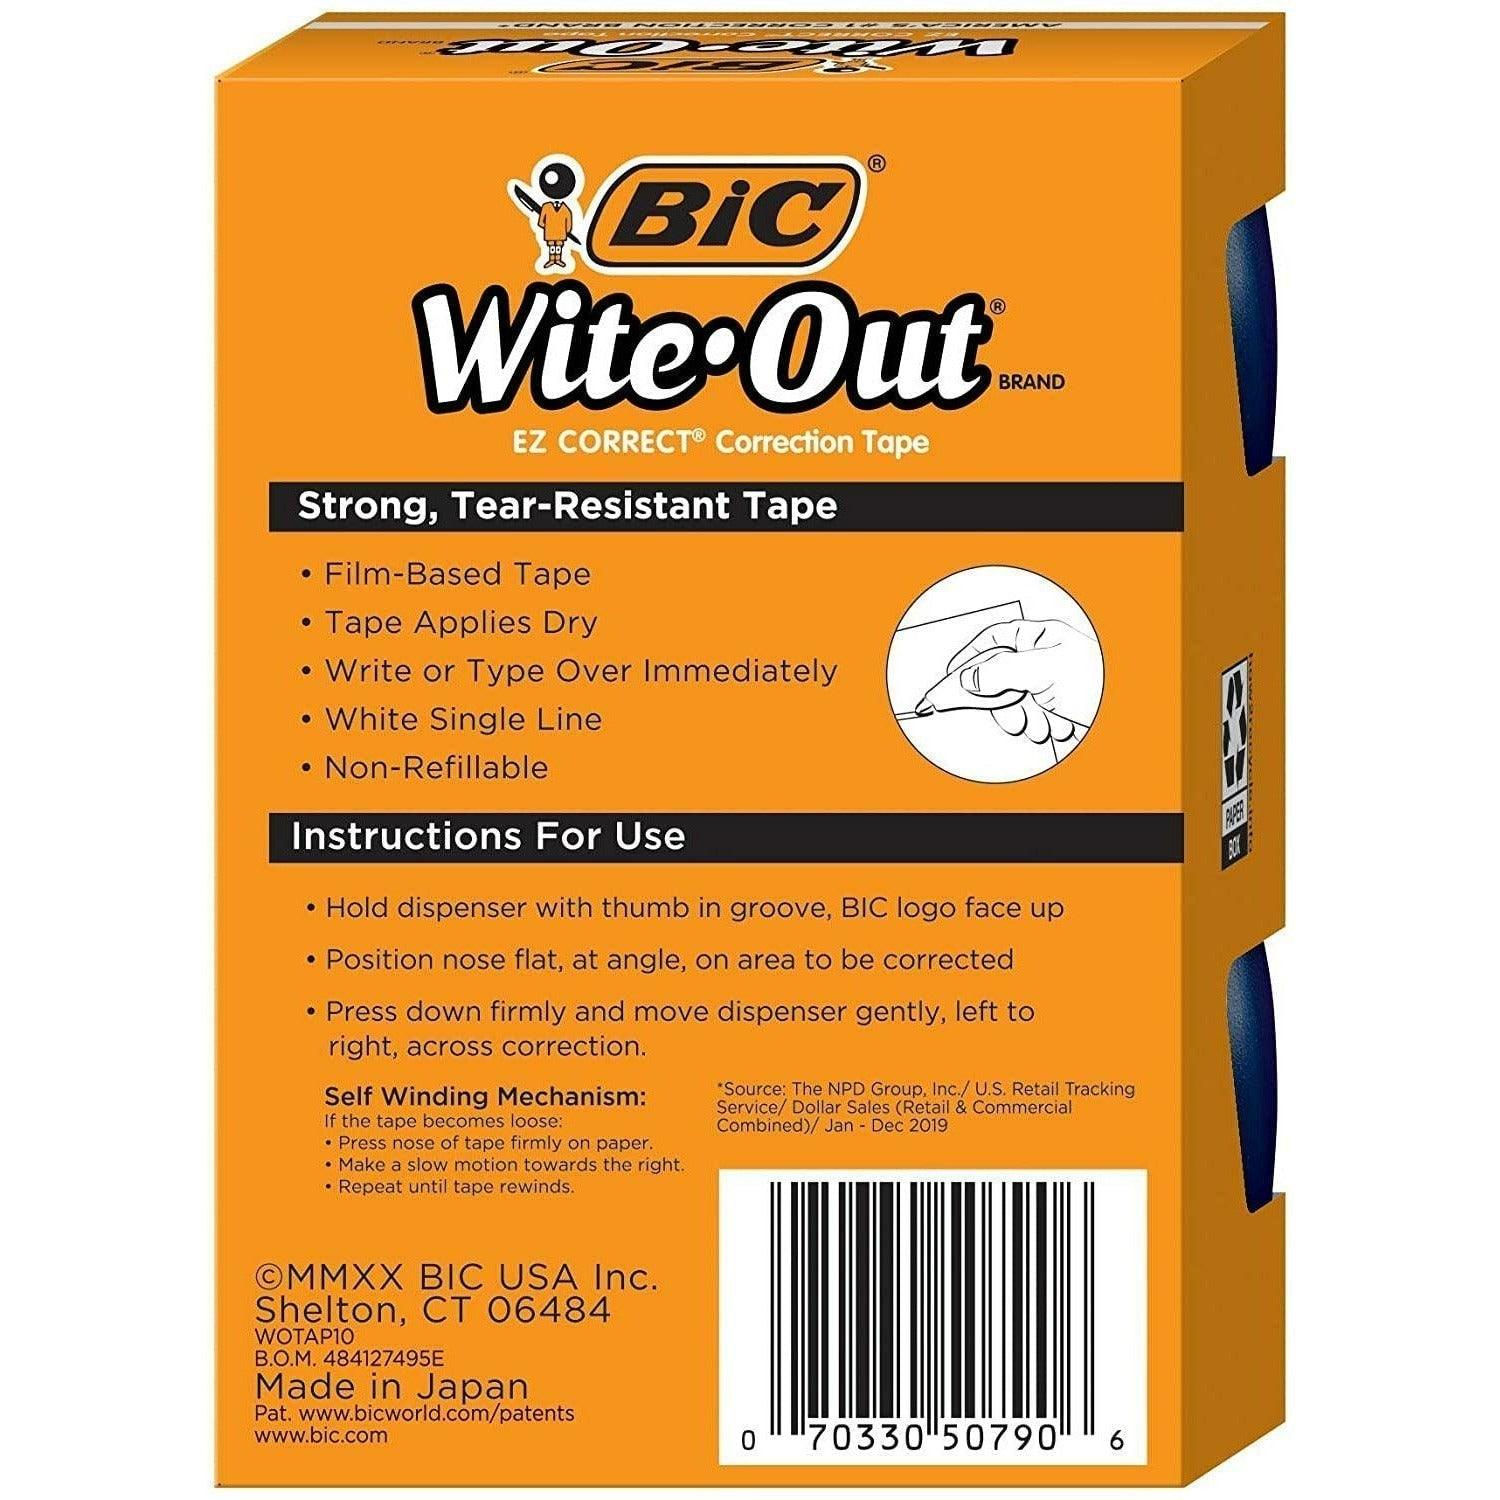 BIC Wite-Out Brand EZ Correct Correction Tape, White  Translucent Dispenser Shows How Much Tape is Remaining (1 Count) - BumbleToys - 5-7 Years, 6+ Years, 8-13 Years, Drawing & Painting, OXE, Pencil, School Supplies, Stationery & Stickers